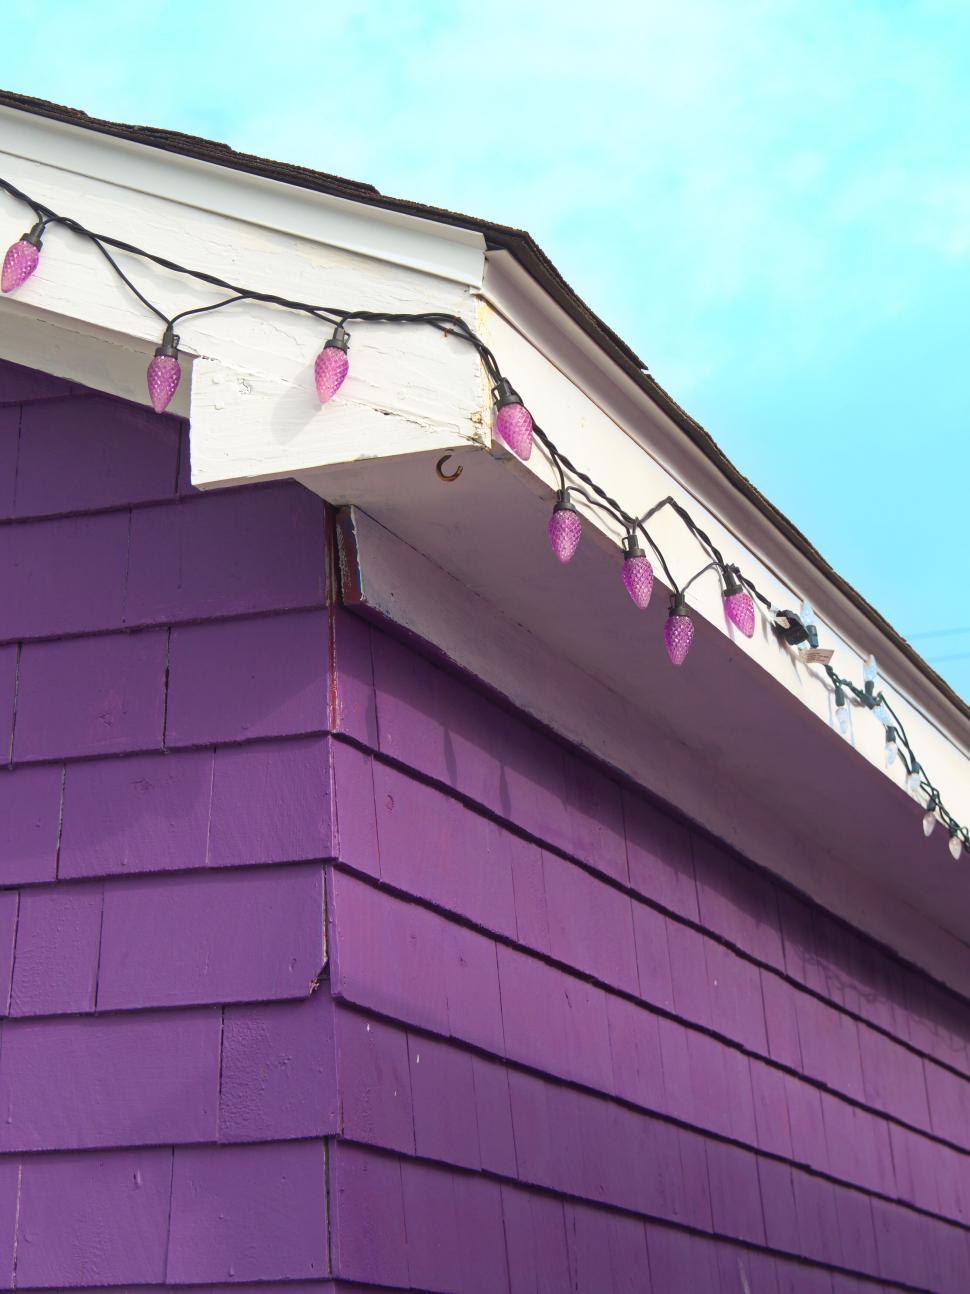 Free Image of Purple house with festive lights 